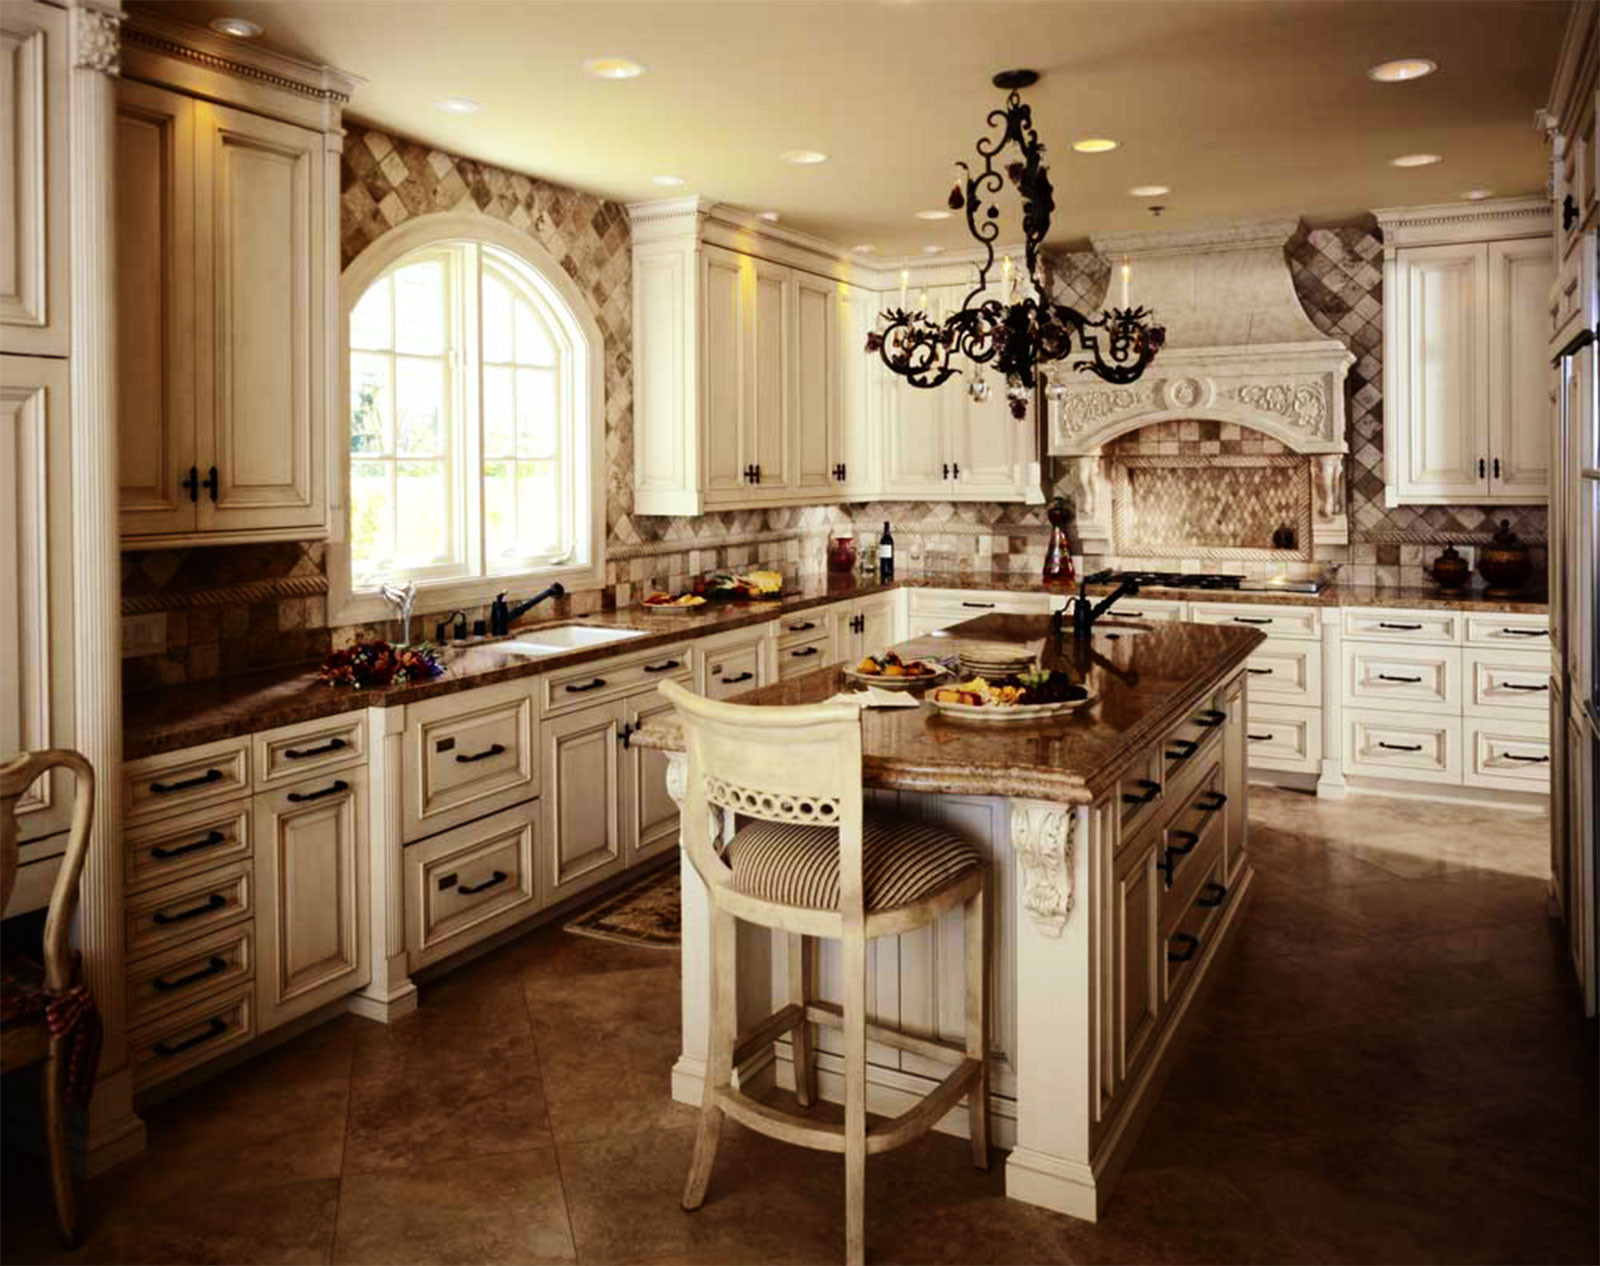 Rustic Kitchen Cabinet Ideas
 Rustic Kitchen Cabinets Country Style Kitchen Home